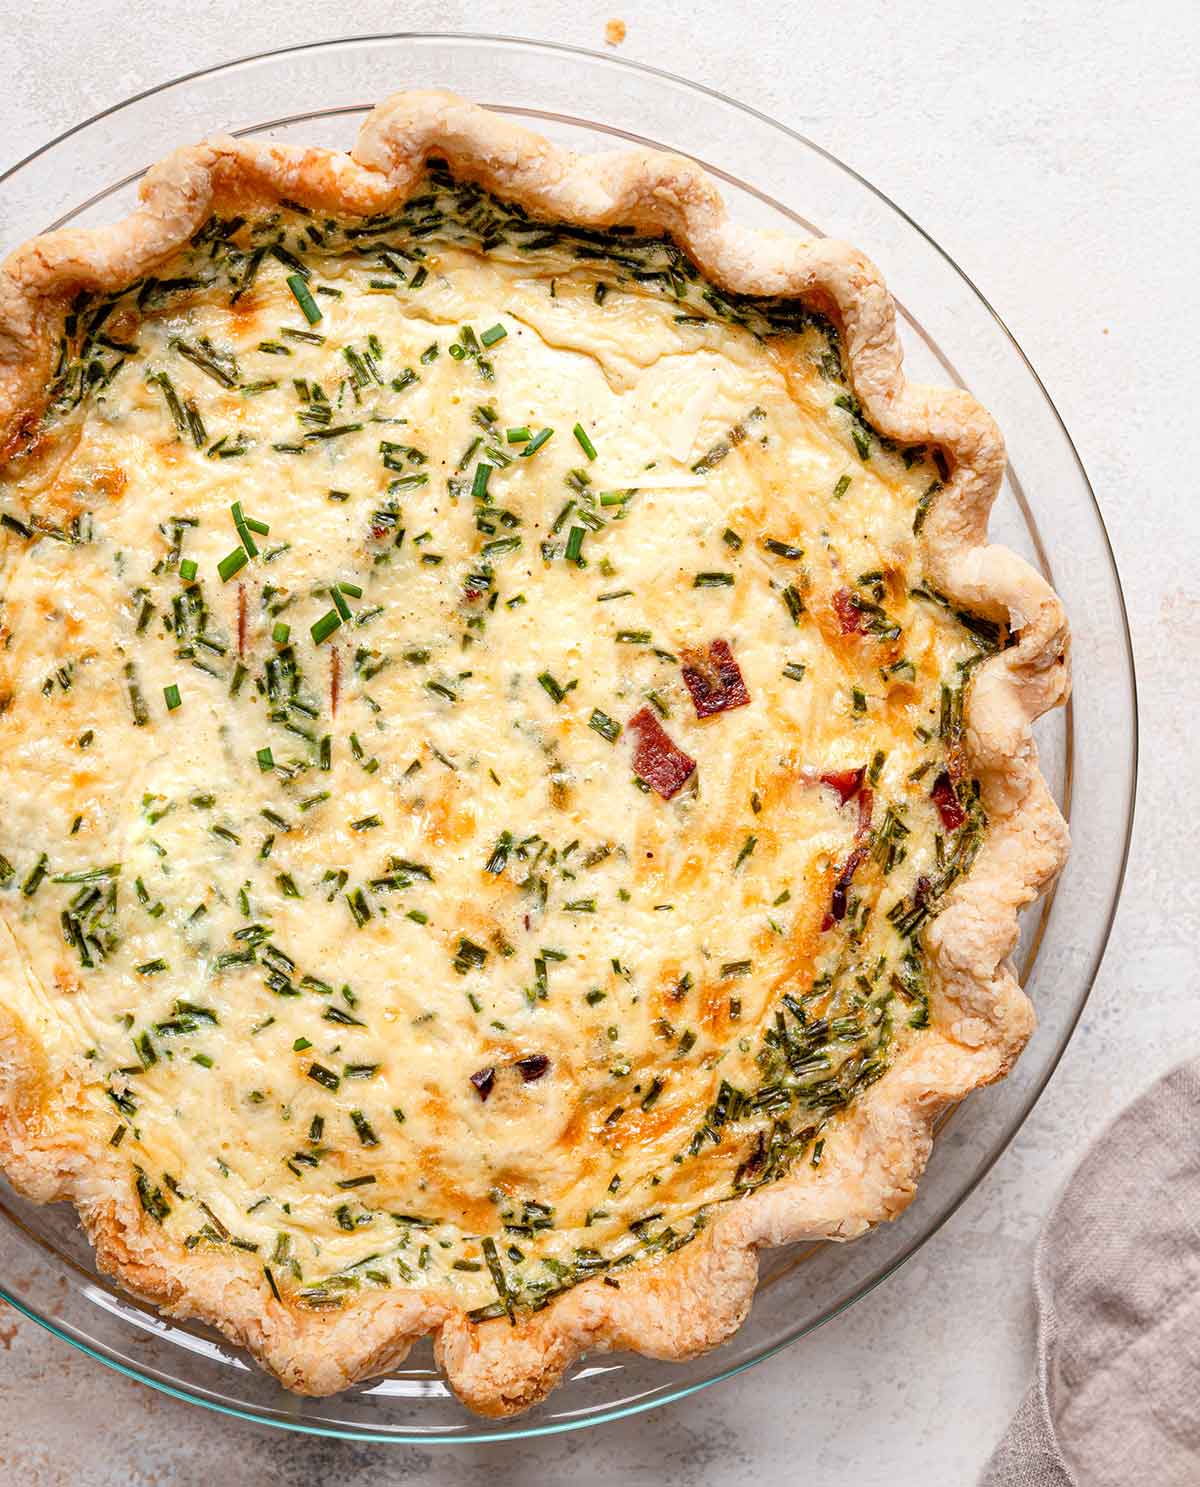 Overview photo of baked quiche Lorraine in glass pie plate.